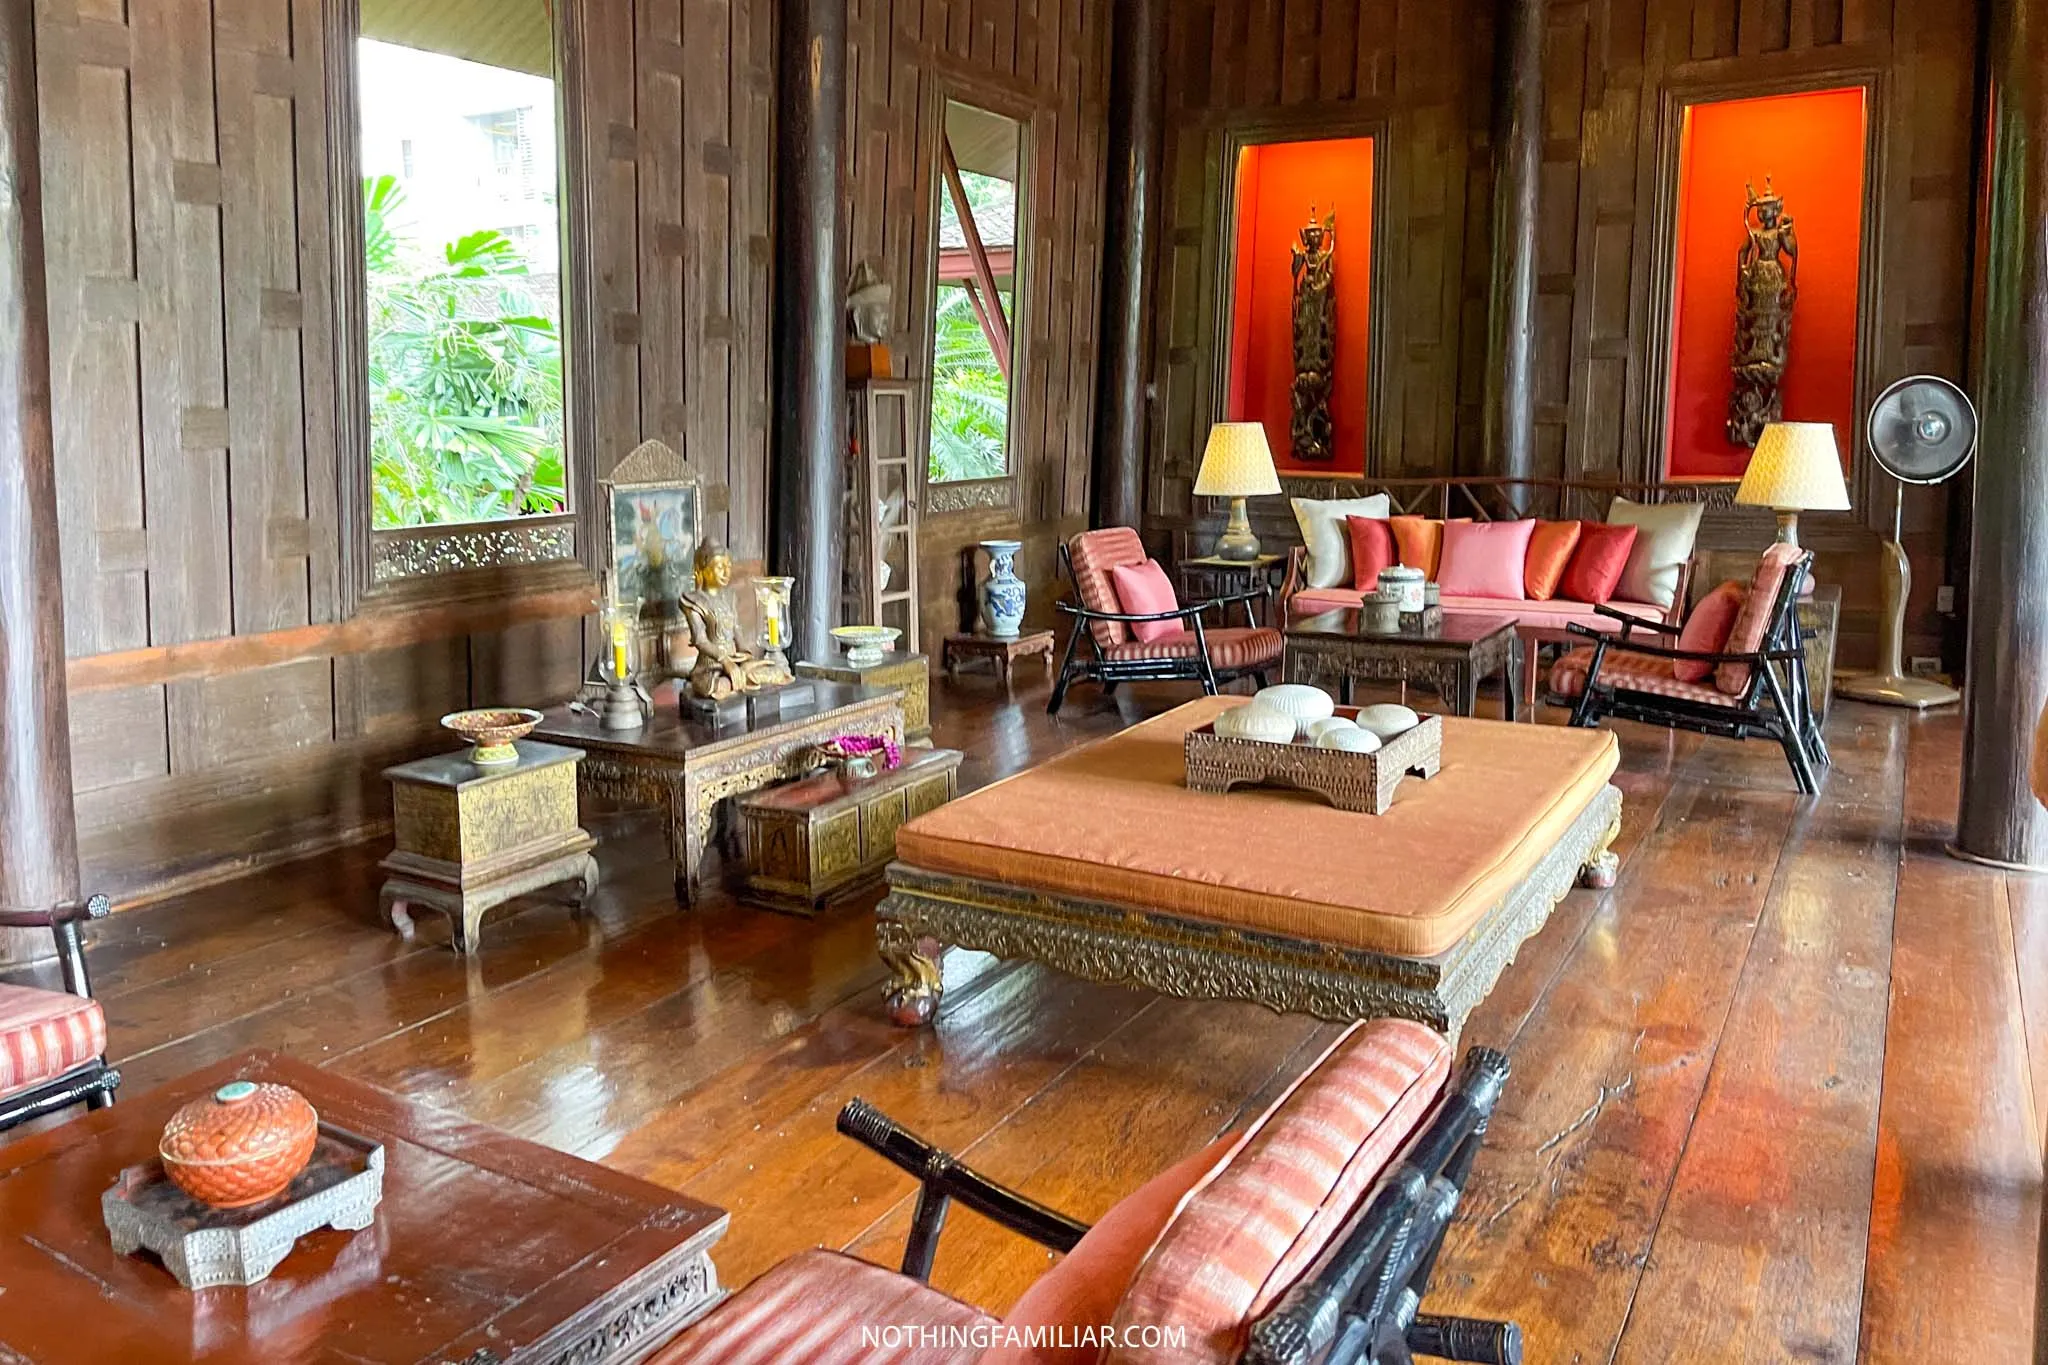 6 Interesting Facts About the Jim Thompson House in Bangkok